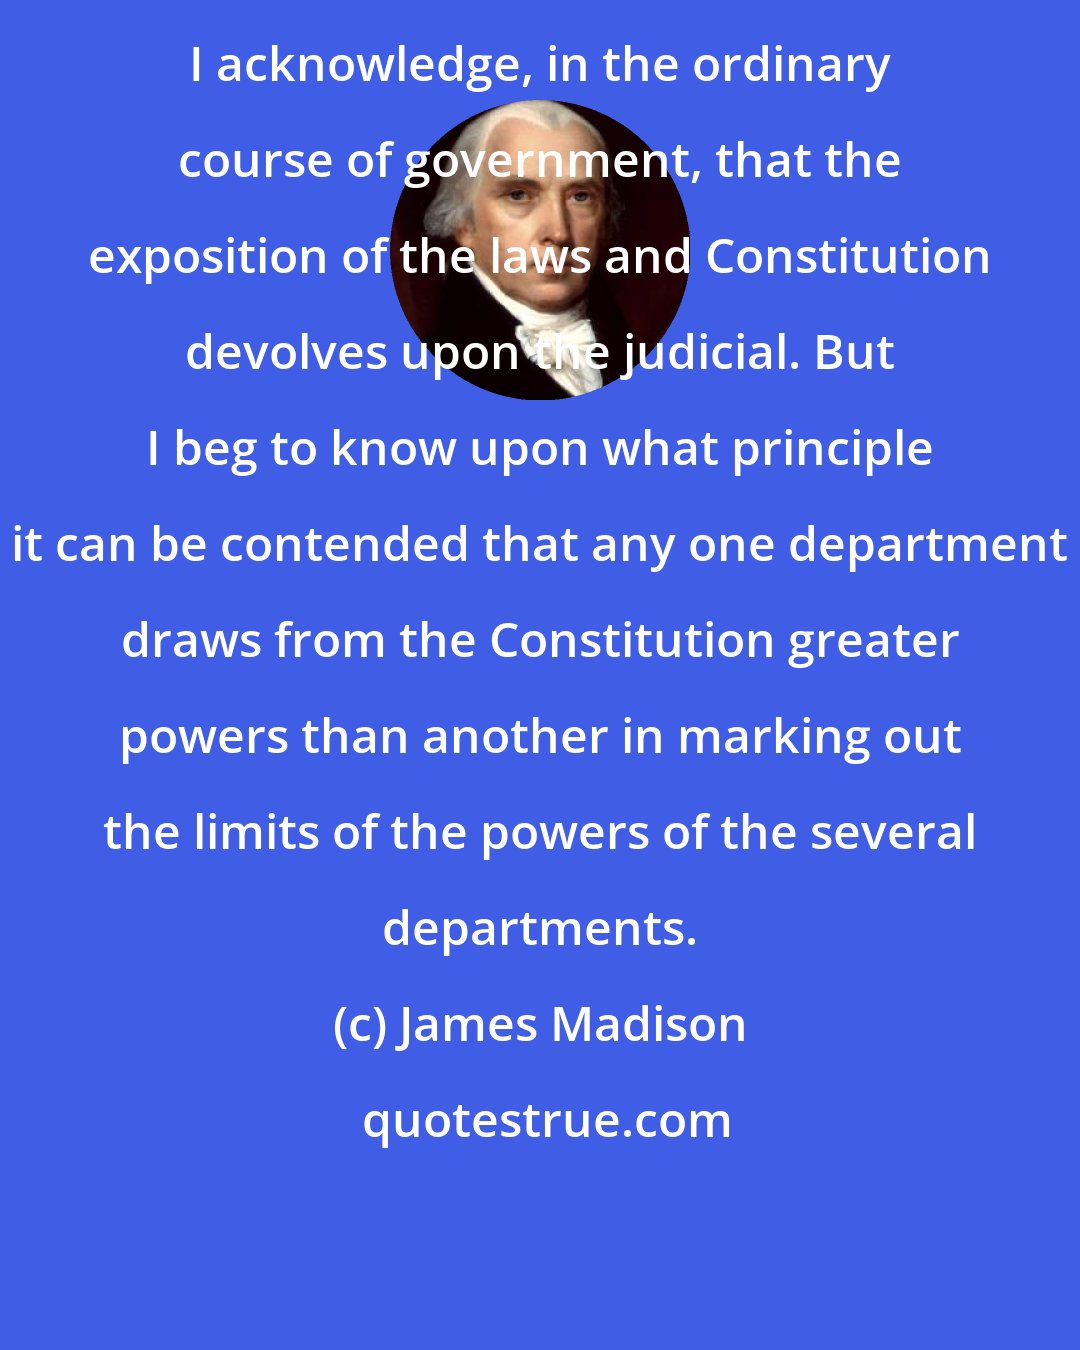 James Madison: I acknowledge, in the ordinary course of government, that the exposition of the laws and Constitution devolves upon the judicial. But I beg to know upon what principle it can be contended that any one department draws from the Constitution greater powers than another in marking out the limits of the powers of the several departments.